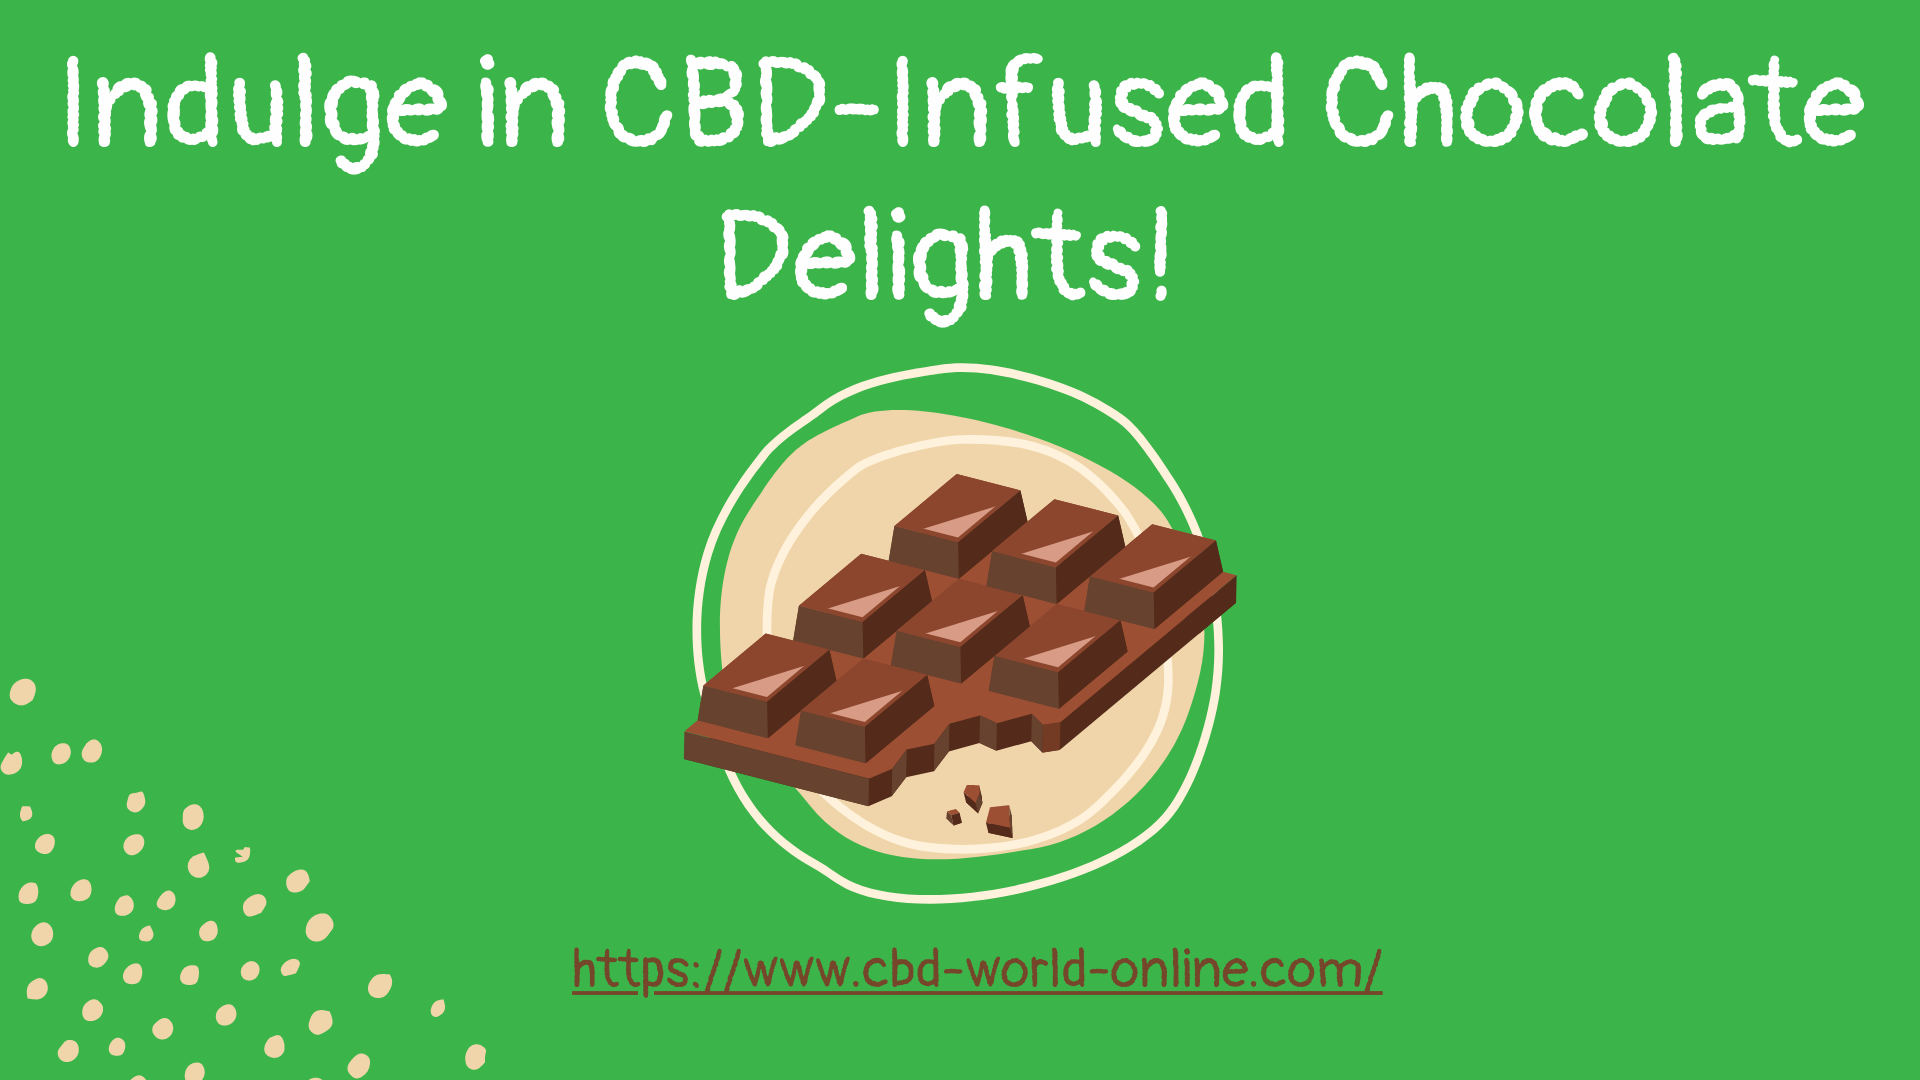 Indulge in CBD-Infused Chocolate Delights!